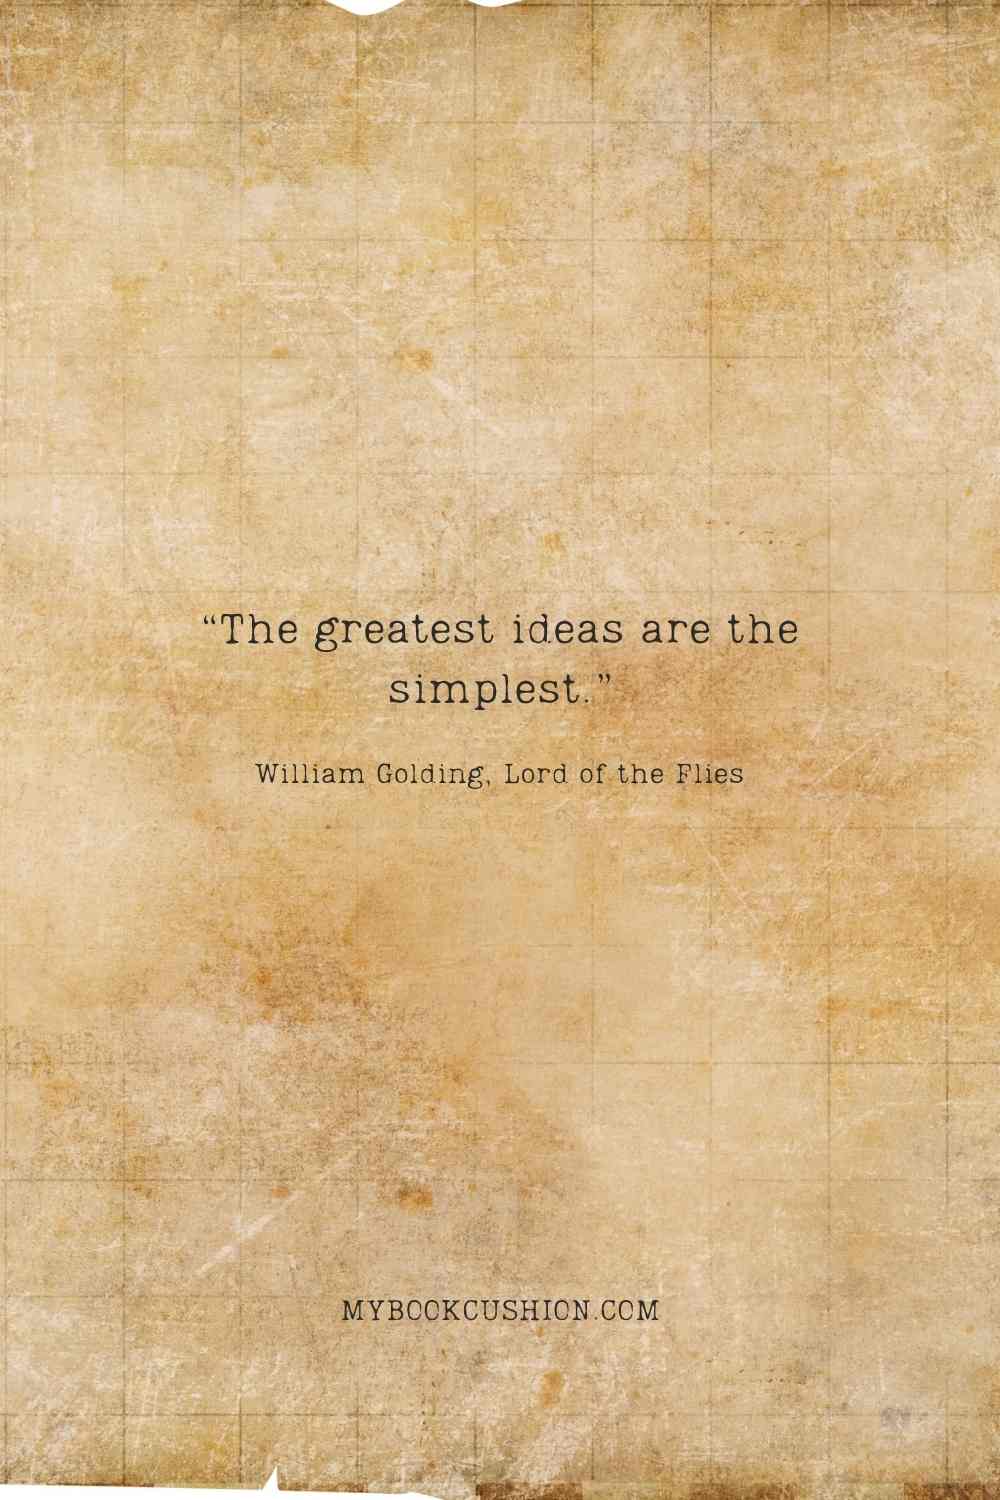 “The greatest ideas are the simplest.” -William Golding, Lord of the Flies